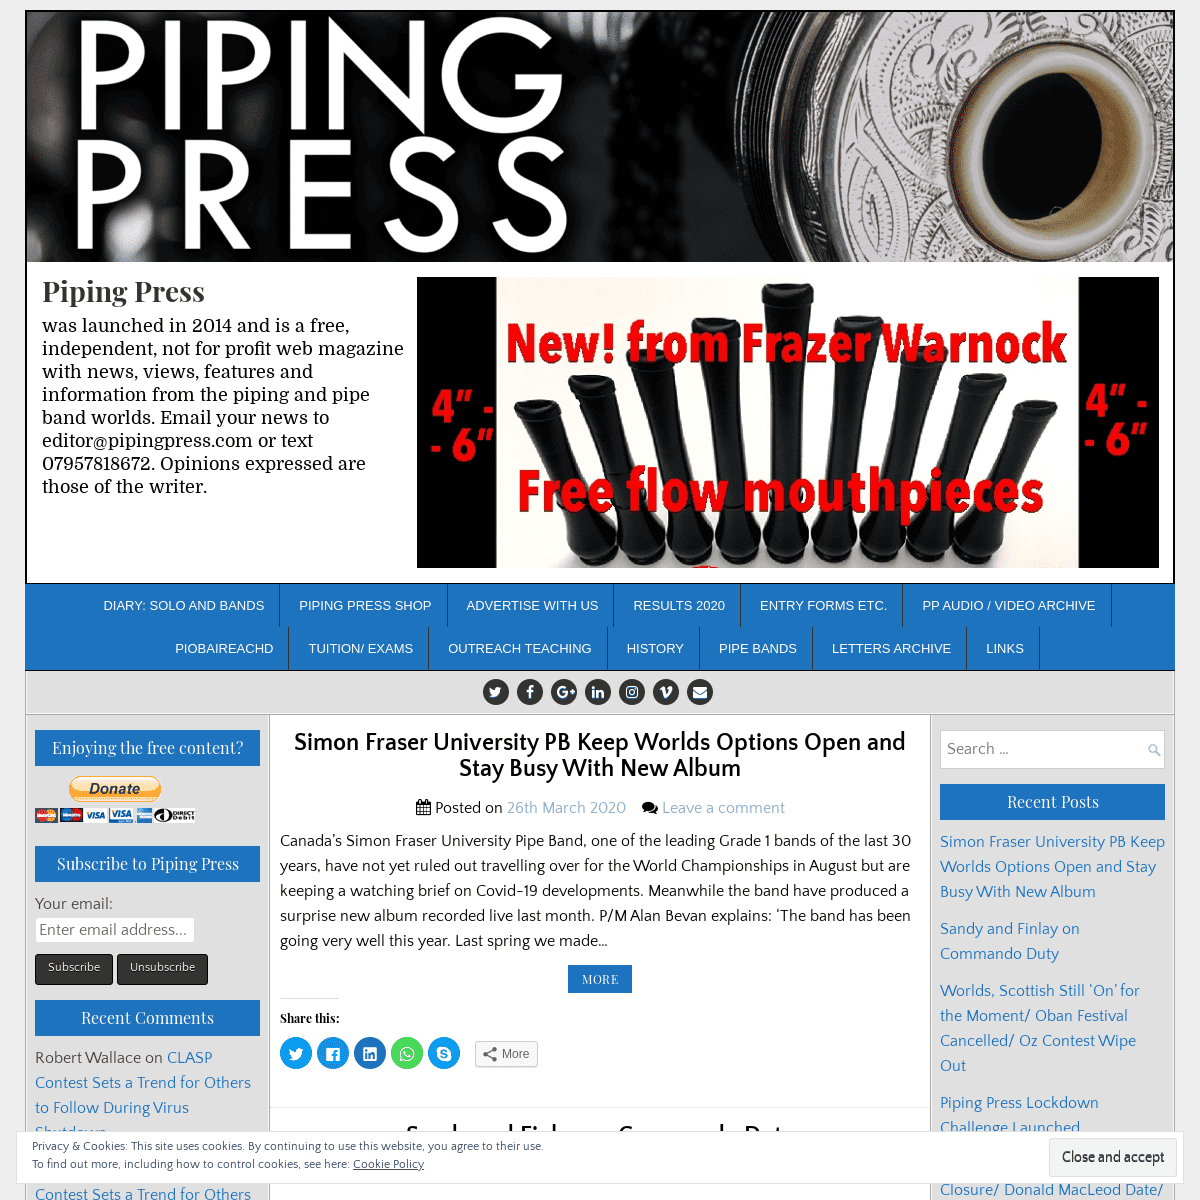 A complete backup of pipingpress.com